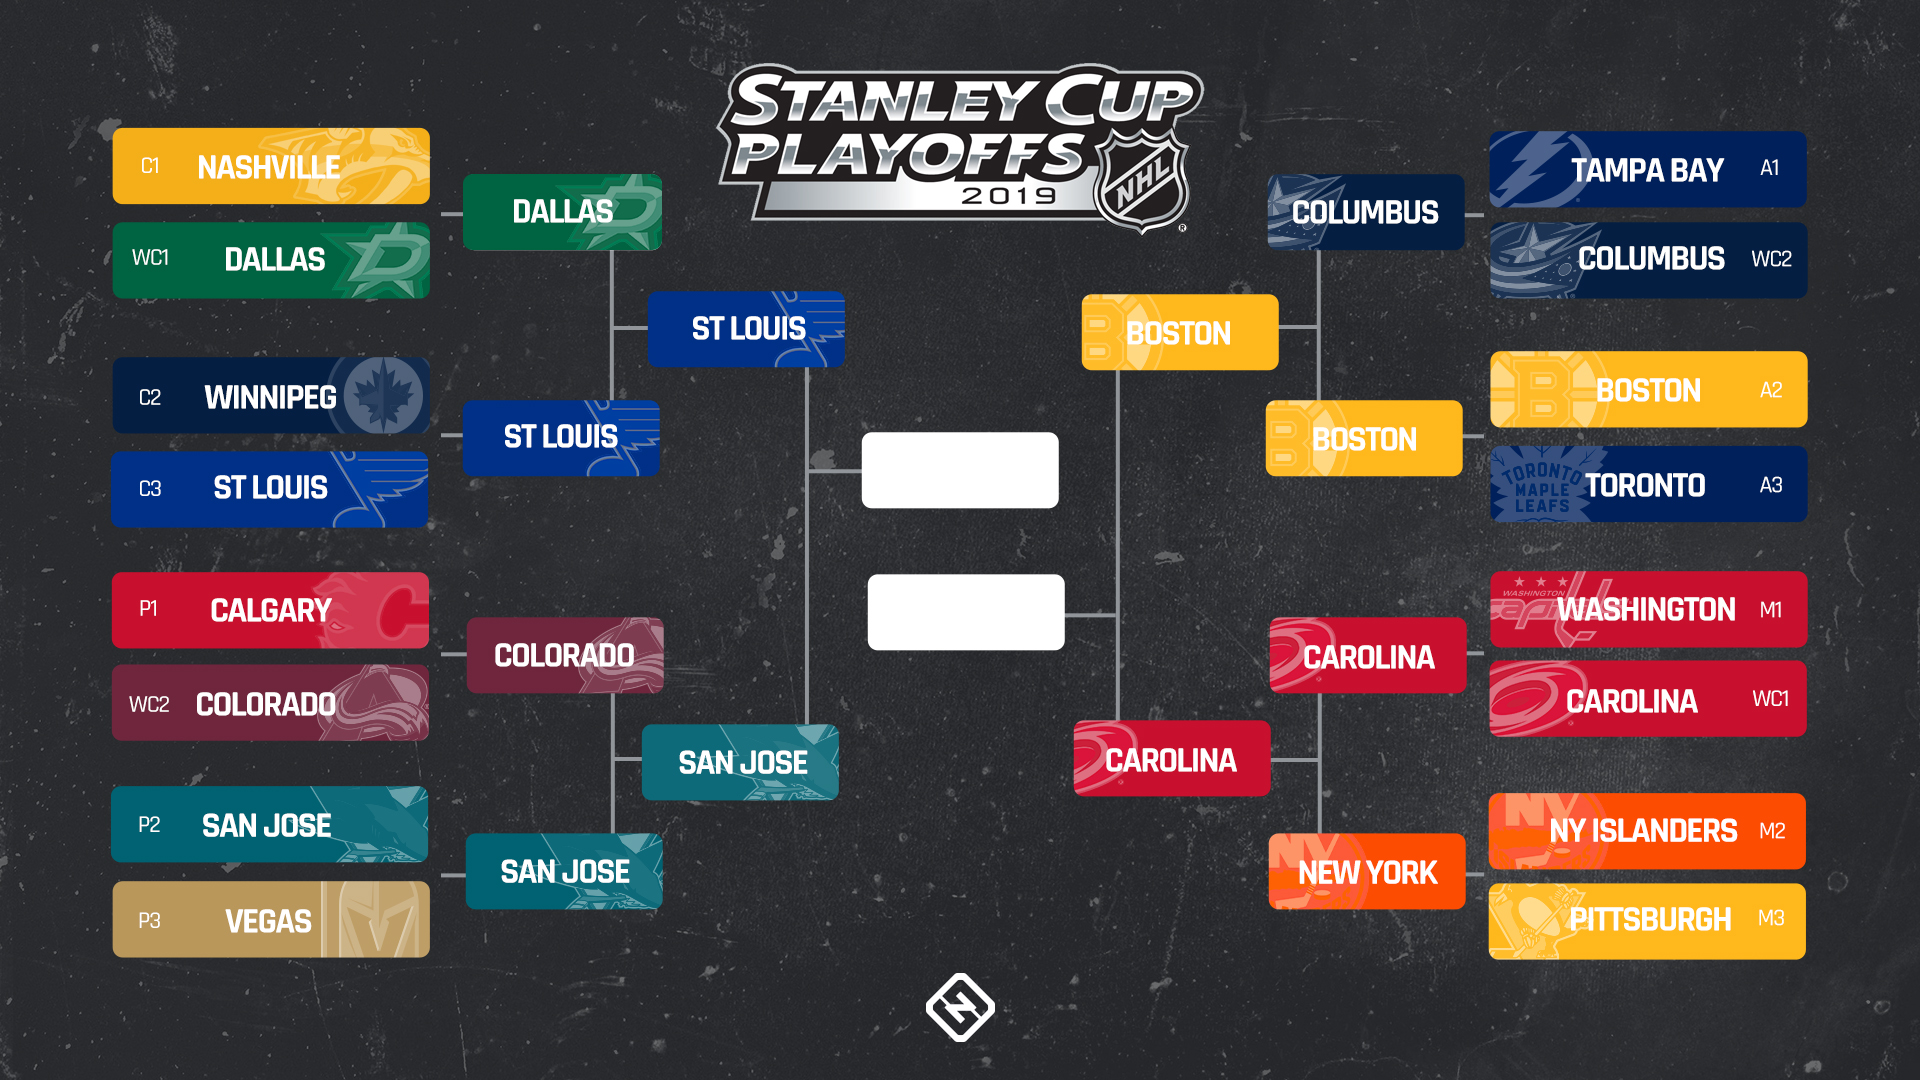 NHL playoffs schedule 2019: Full bracket, dates, times, TV channels for every series ...1920 x 1080